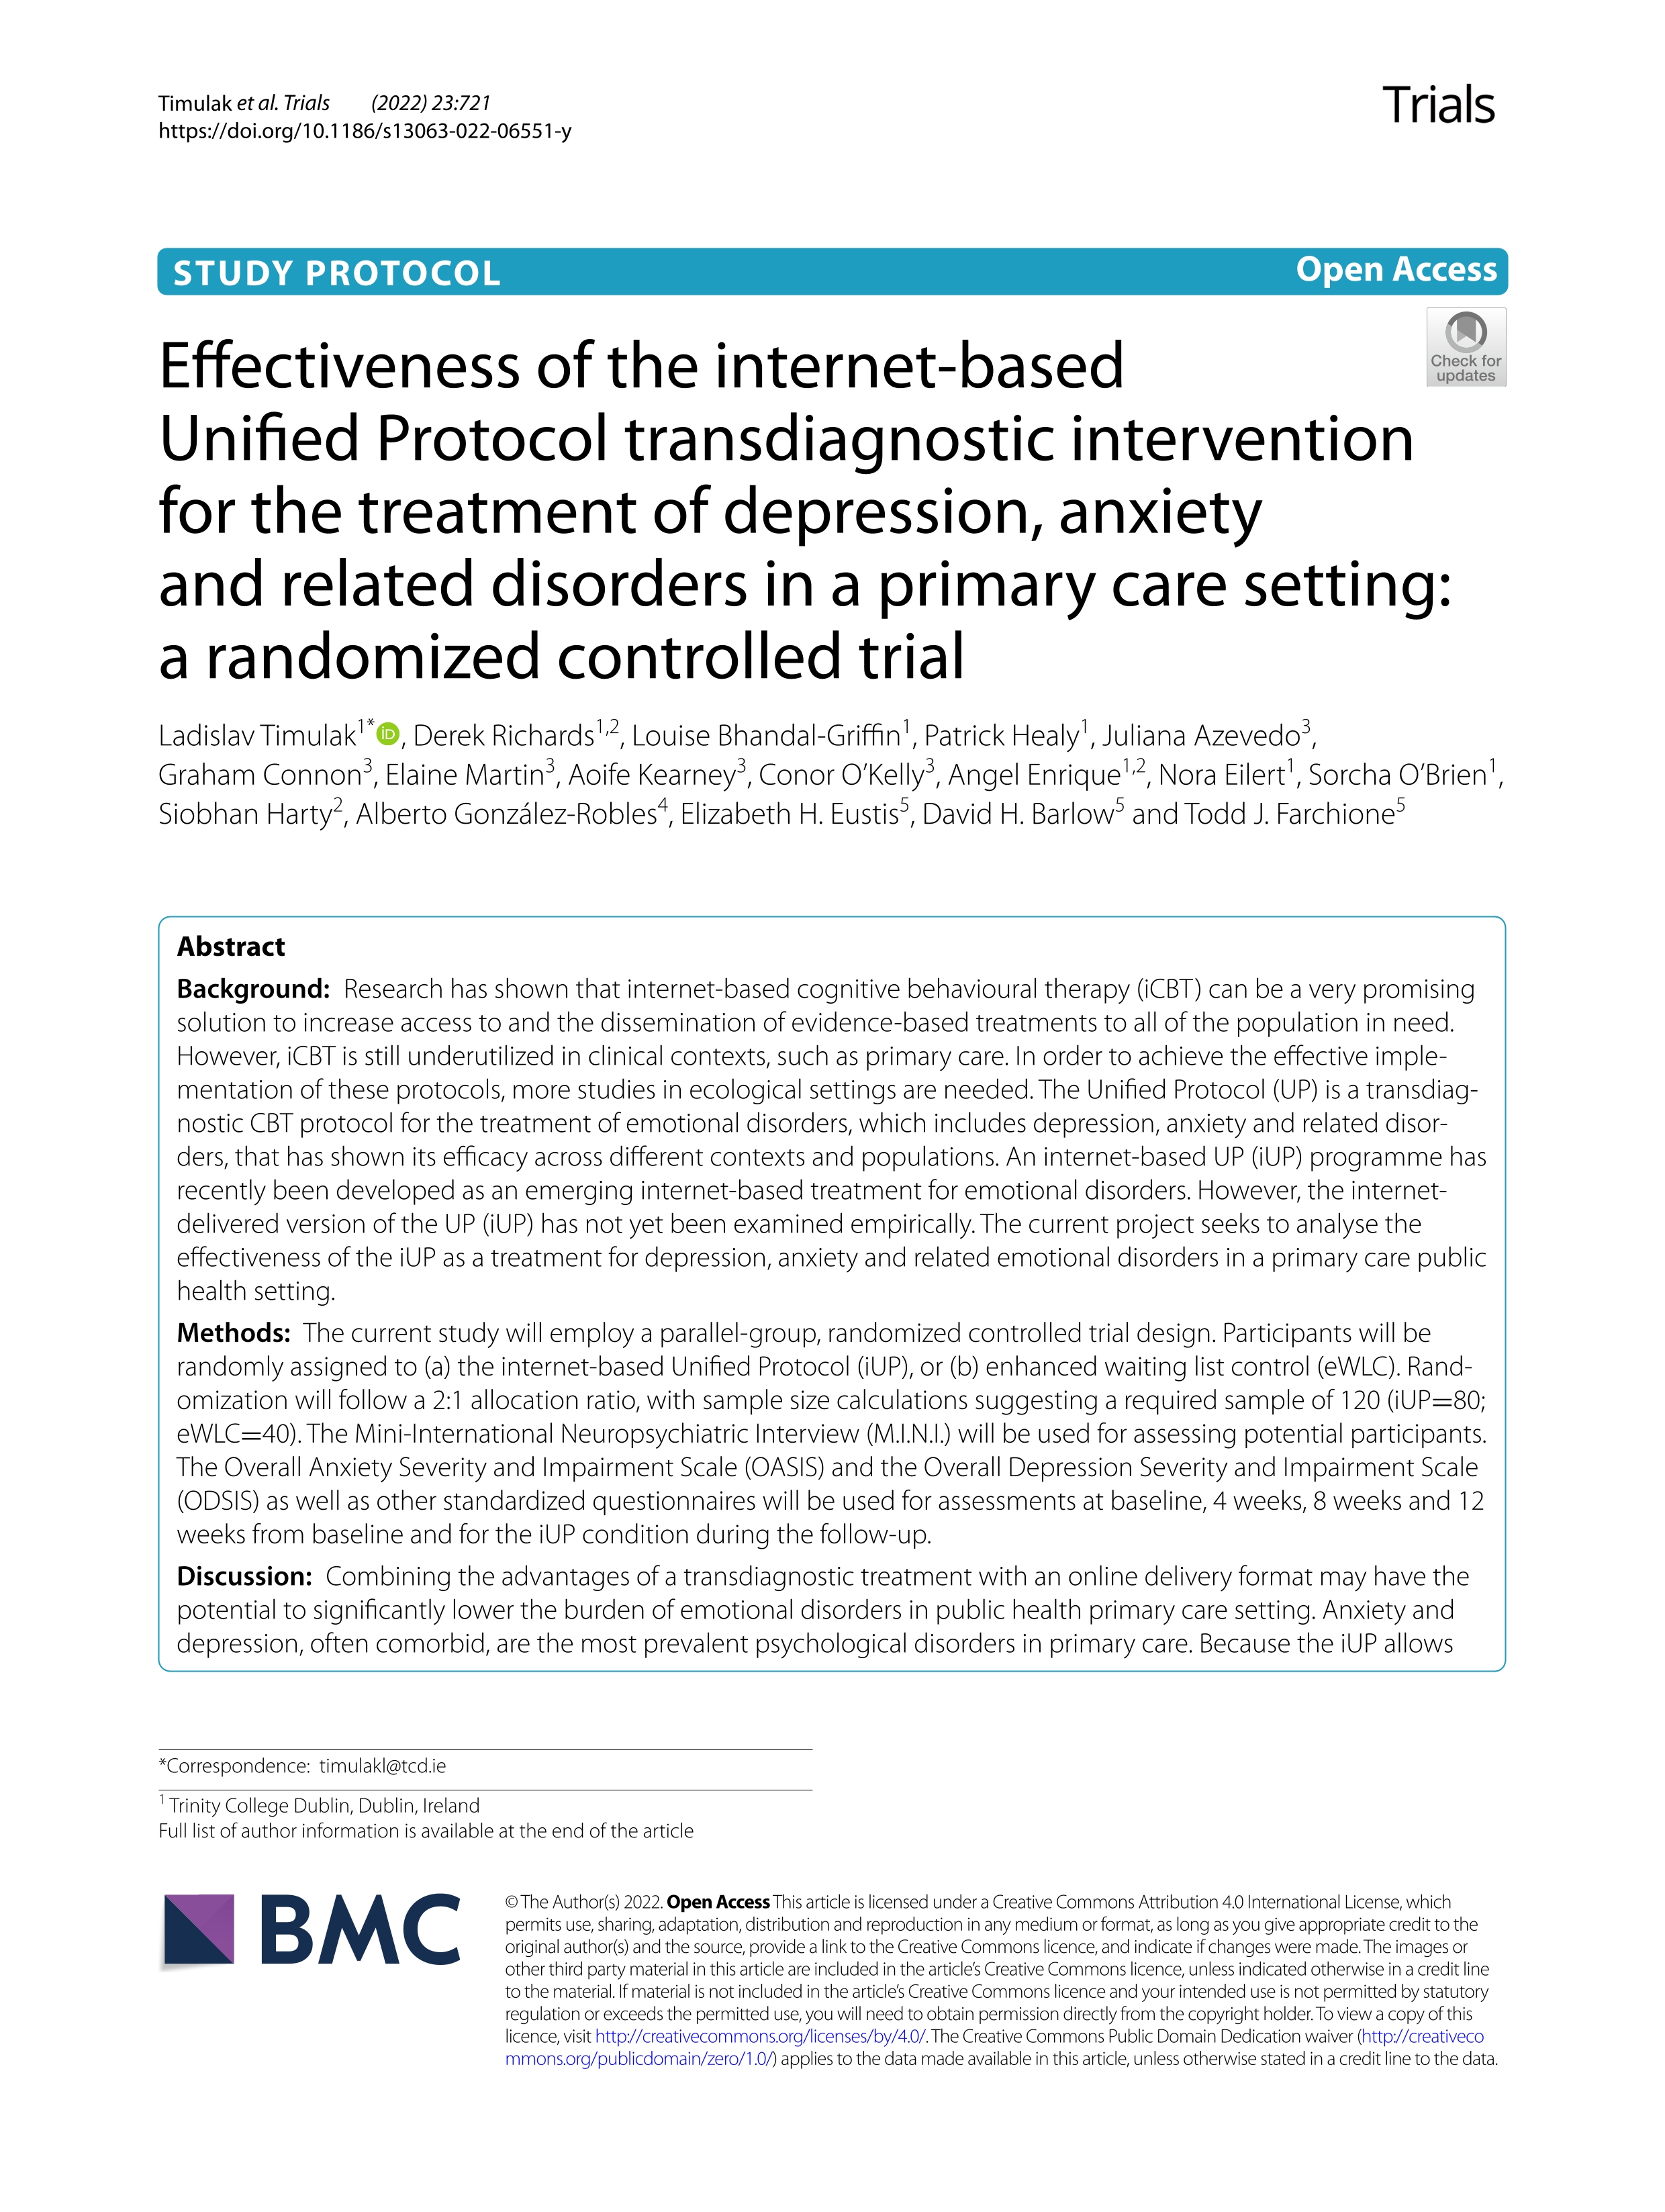 Effectiveness of the internet-based Unified Protocol transdiagnostic intervention for the treatment of depression, anxiety and related disorders in a primary care setting: a randomized controlled trial